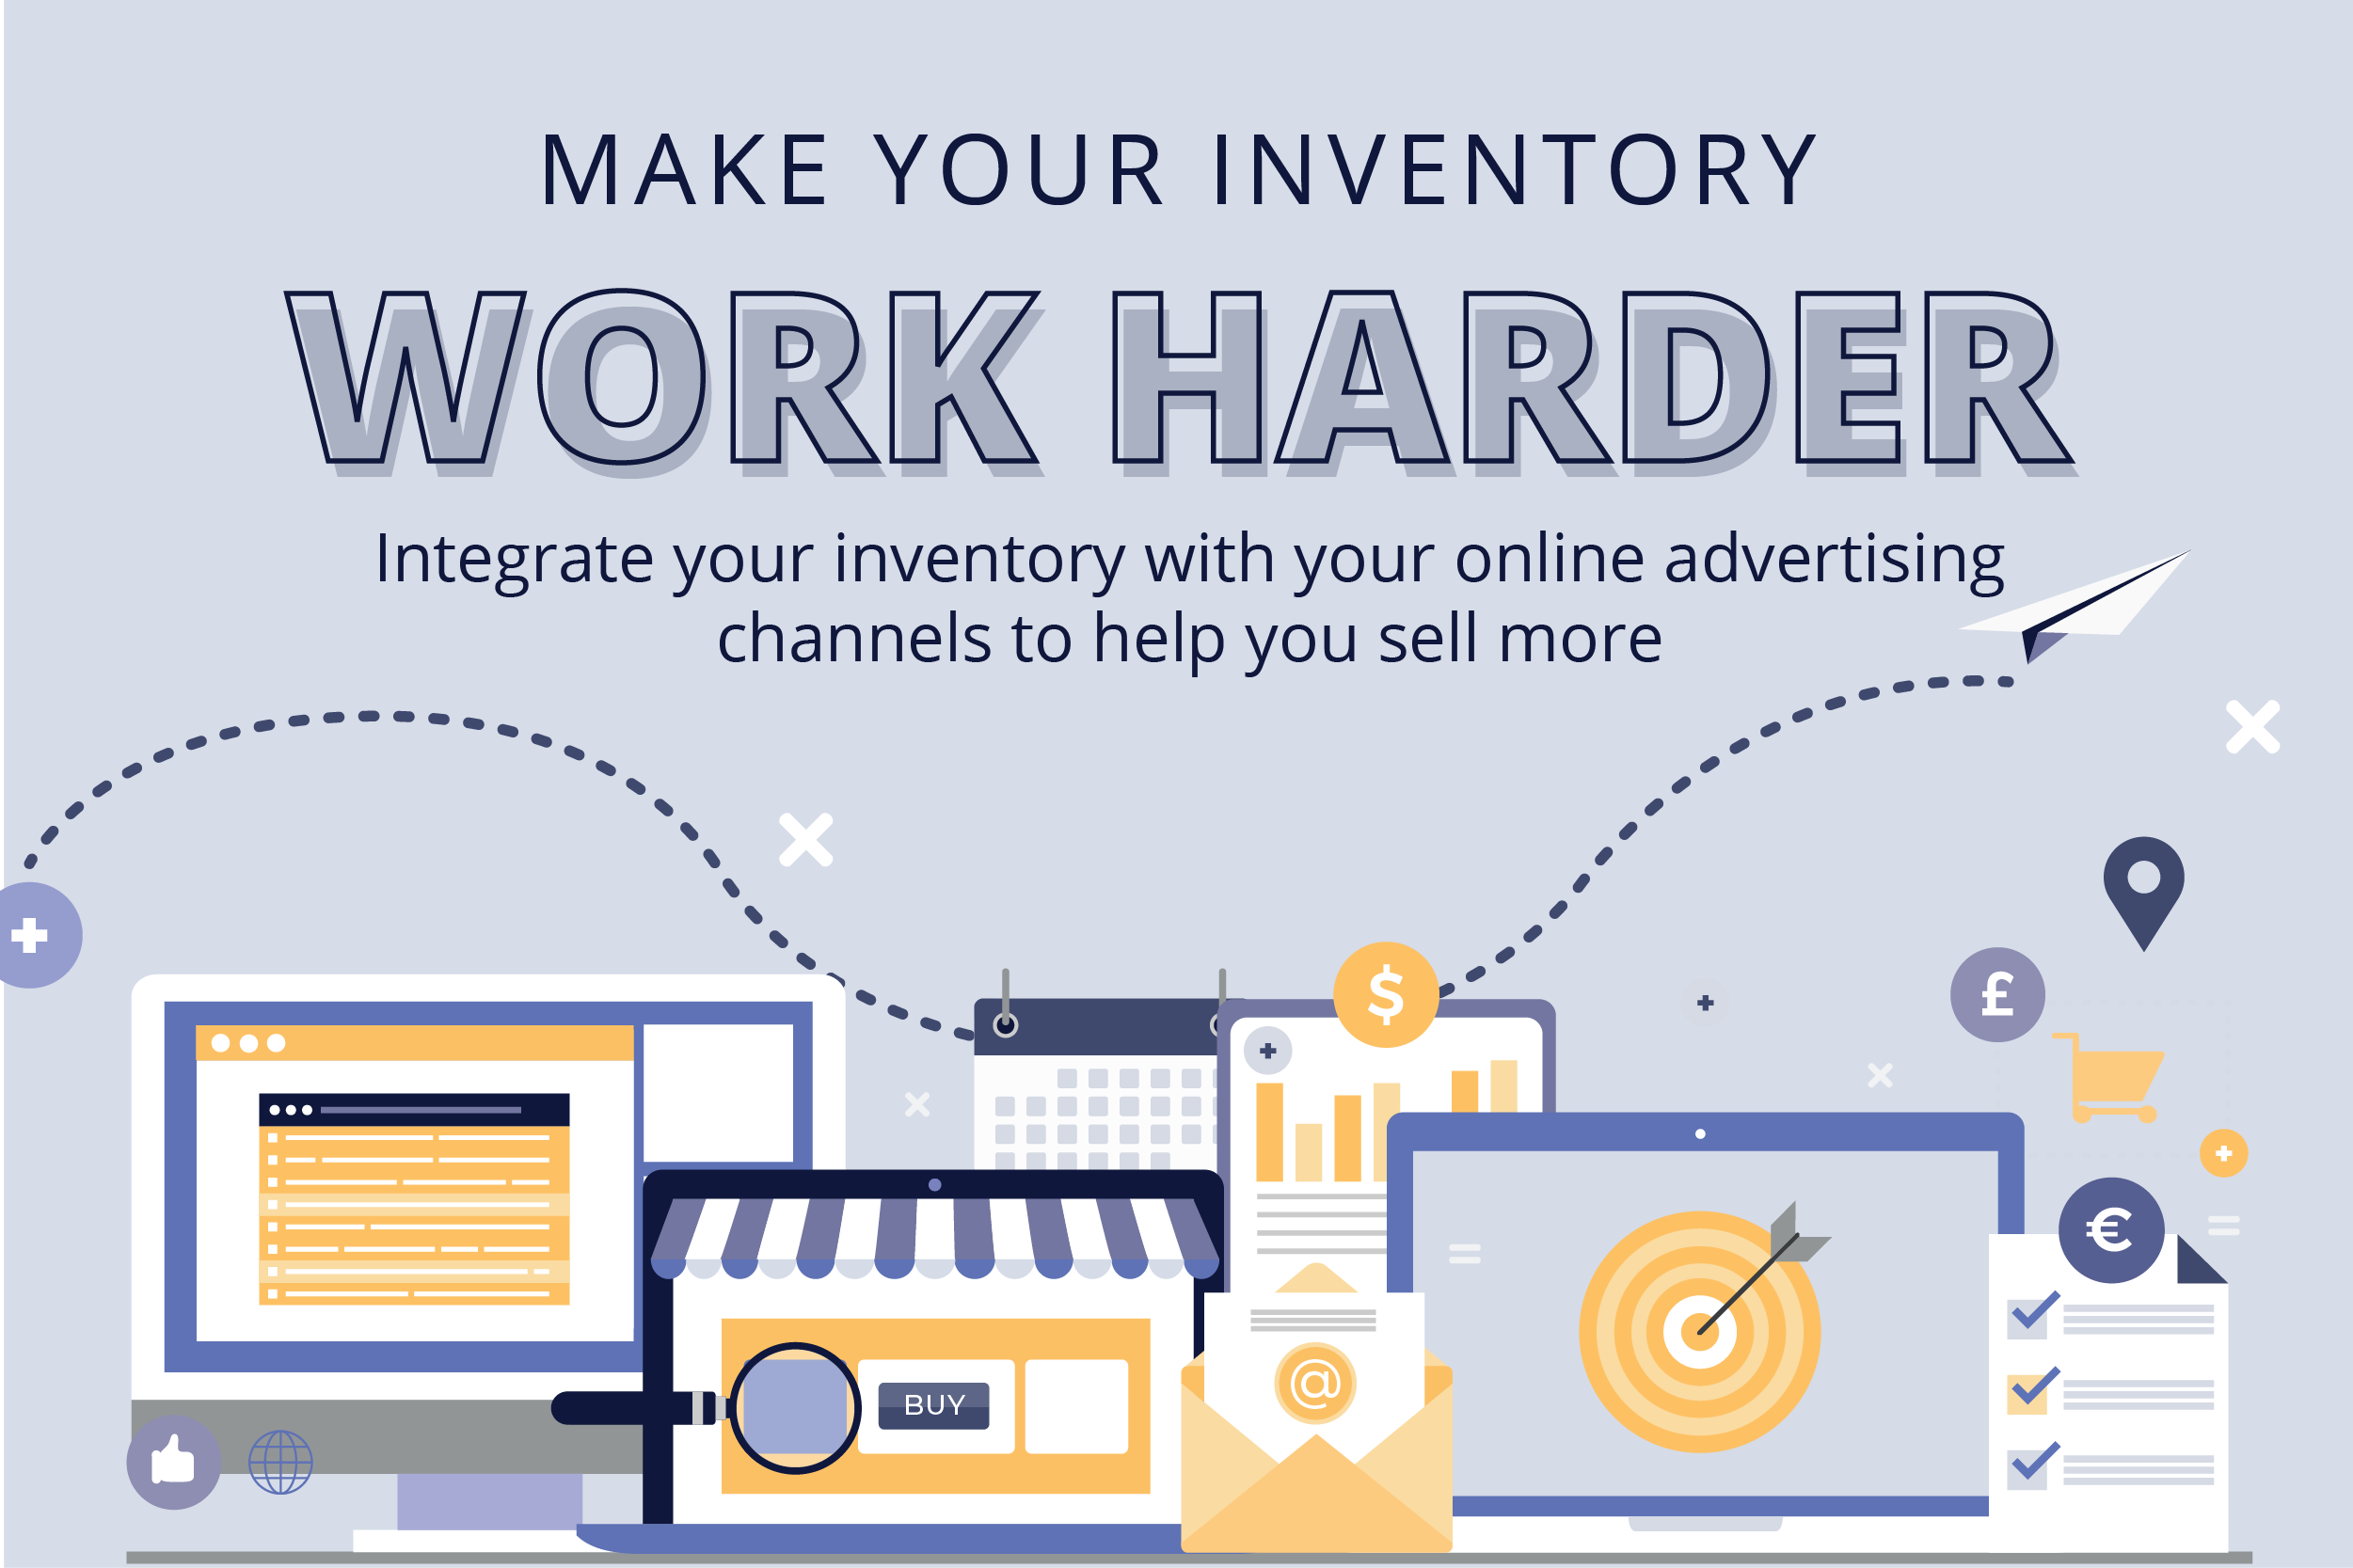 Make your inventory work harder - illustration of laptops, screens and dollar icons